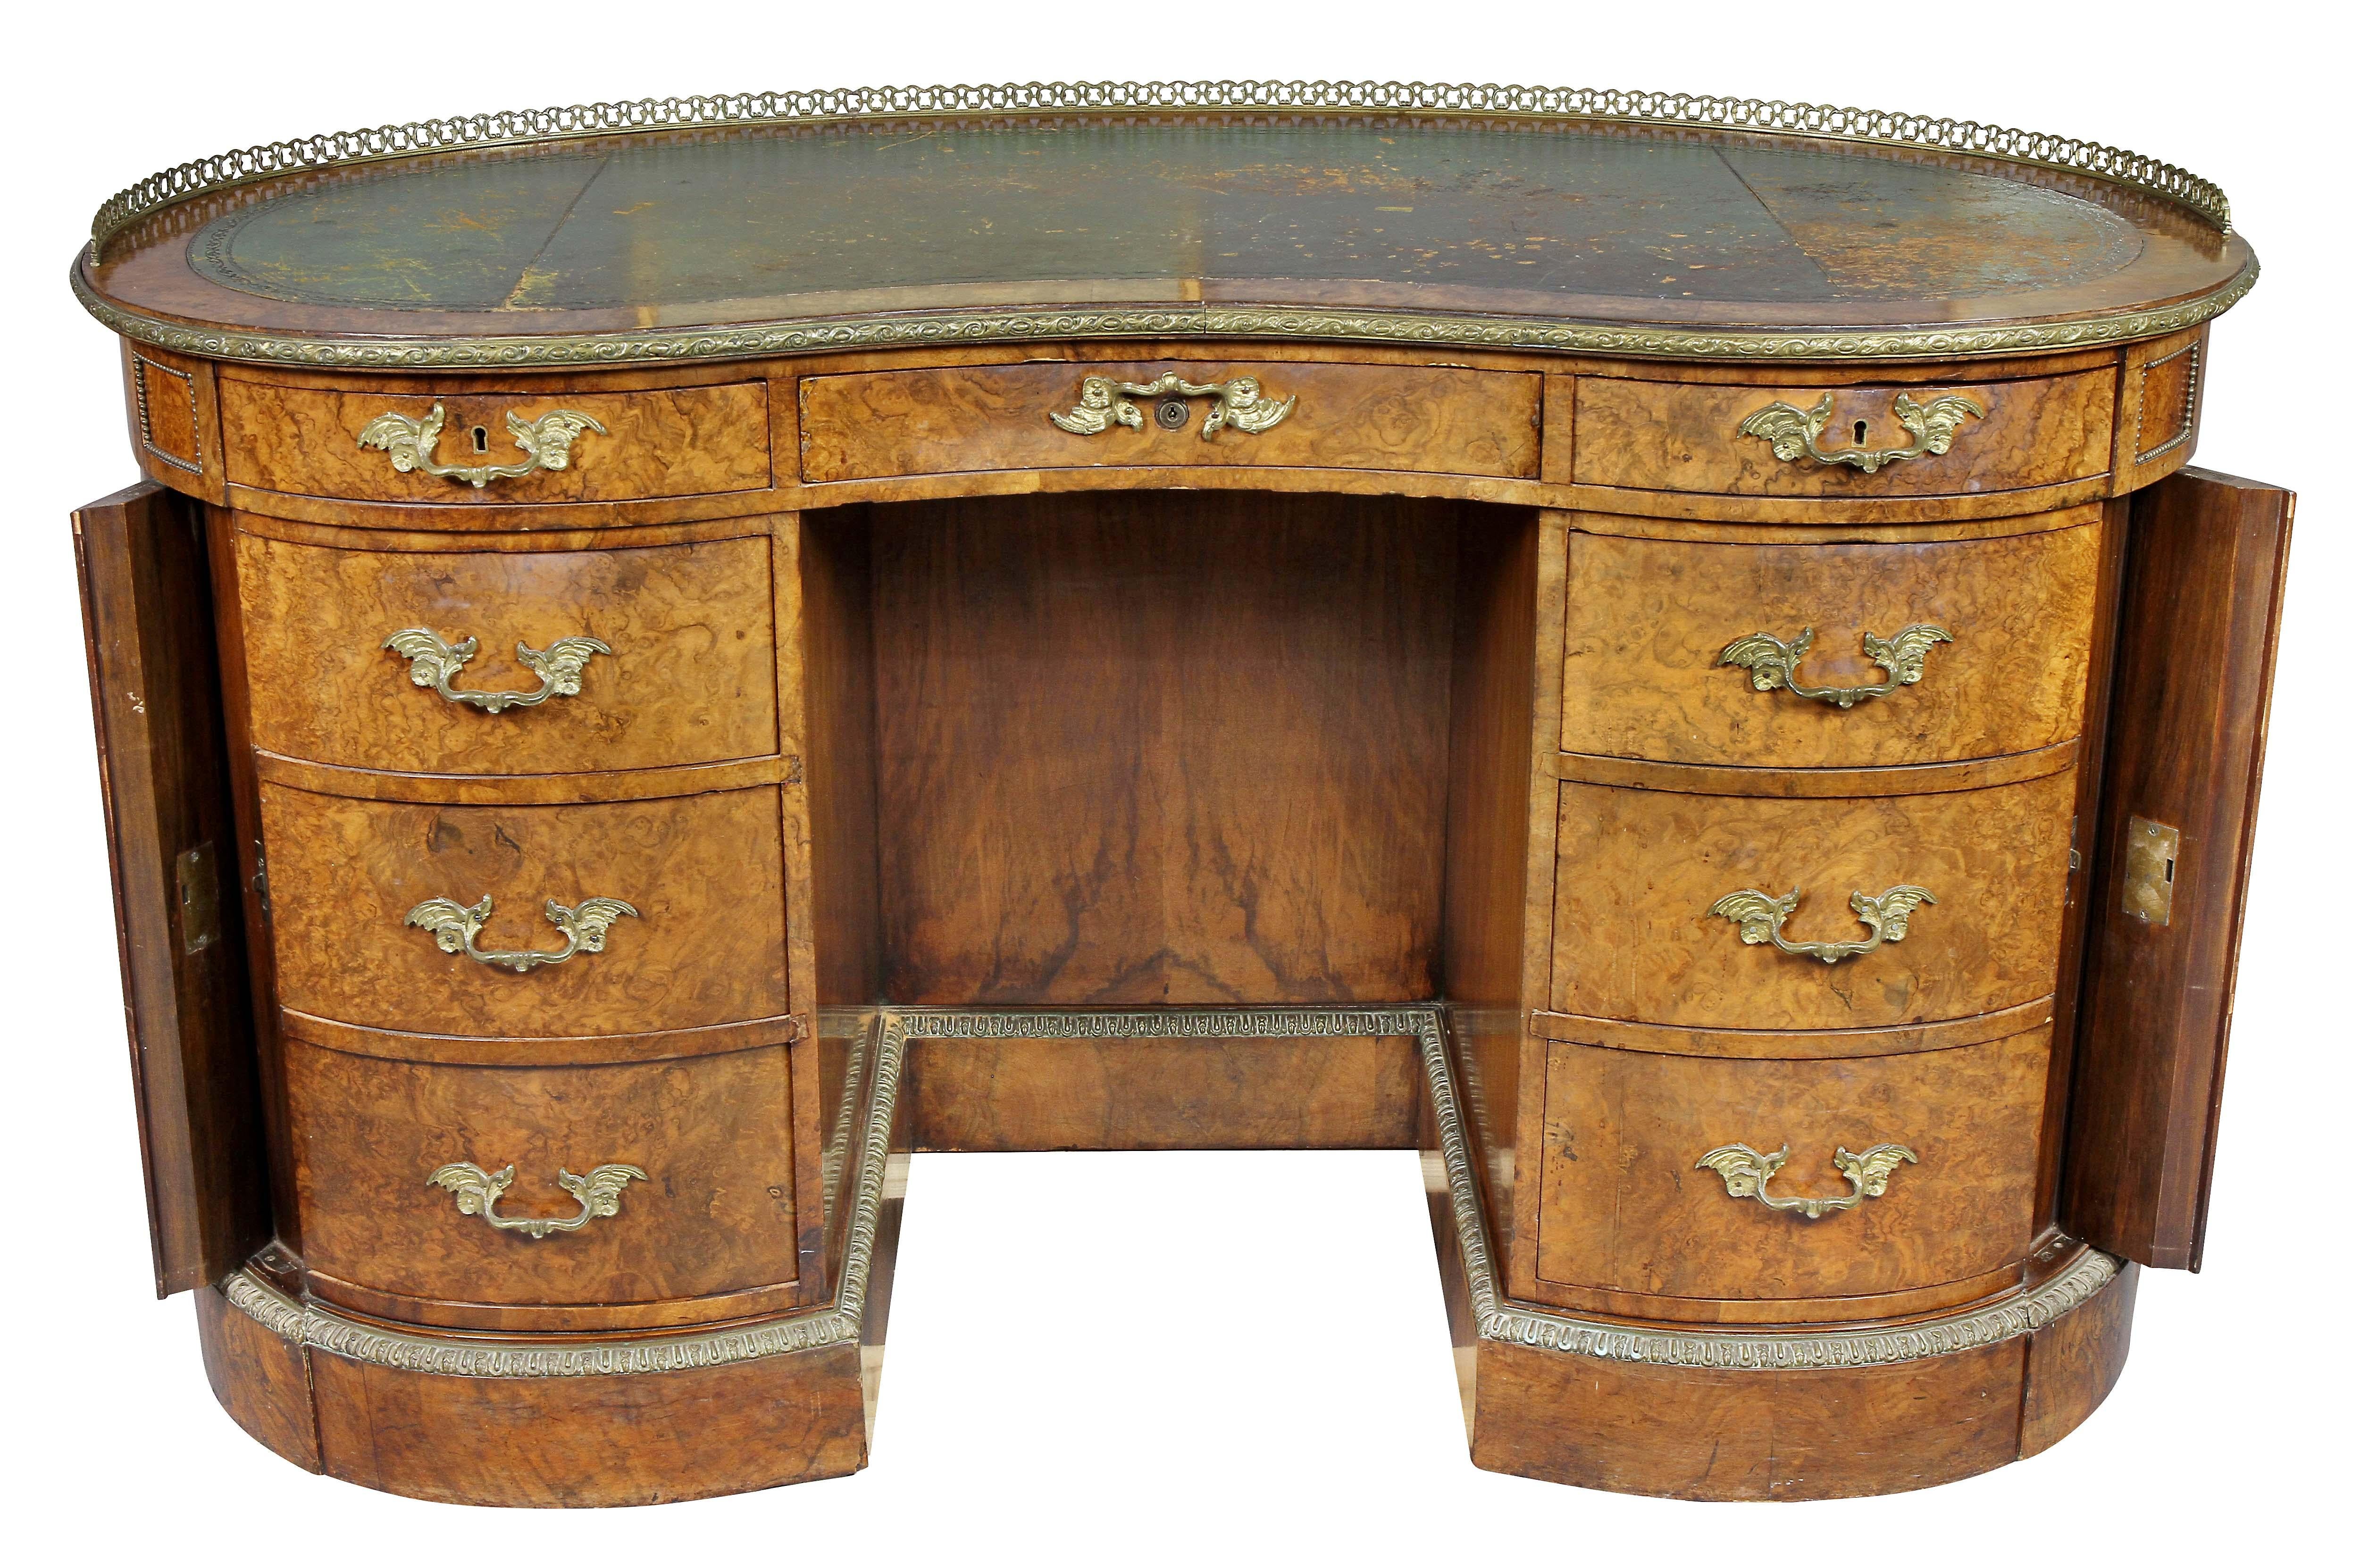 Victorian Burr Walnut and Bronze Mounted Kidney Shaped Desk by Gillow 2